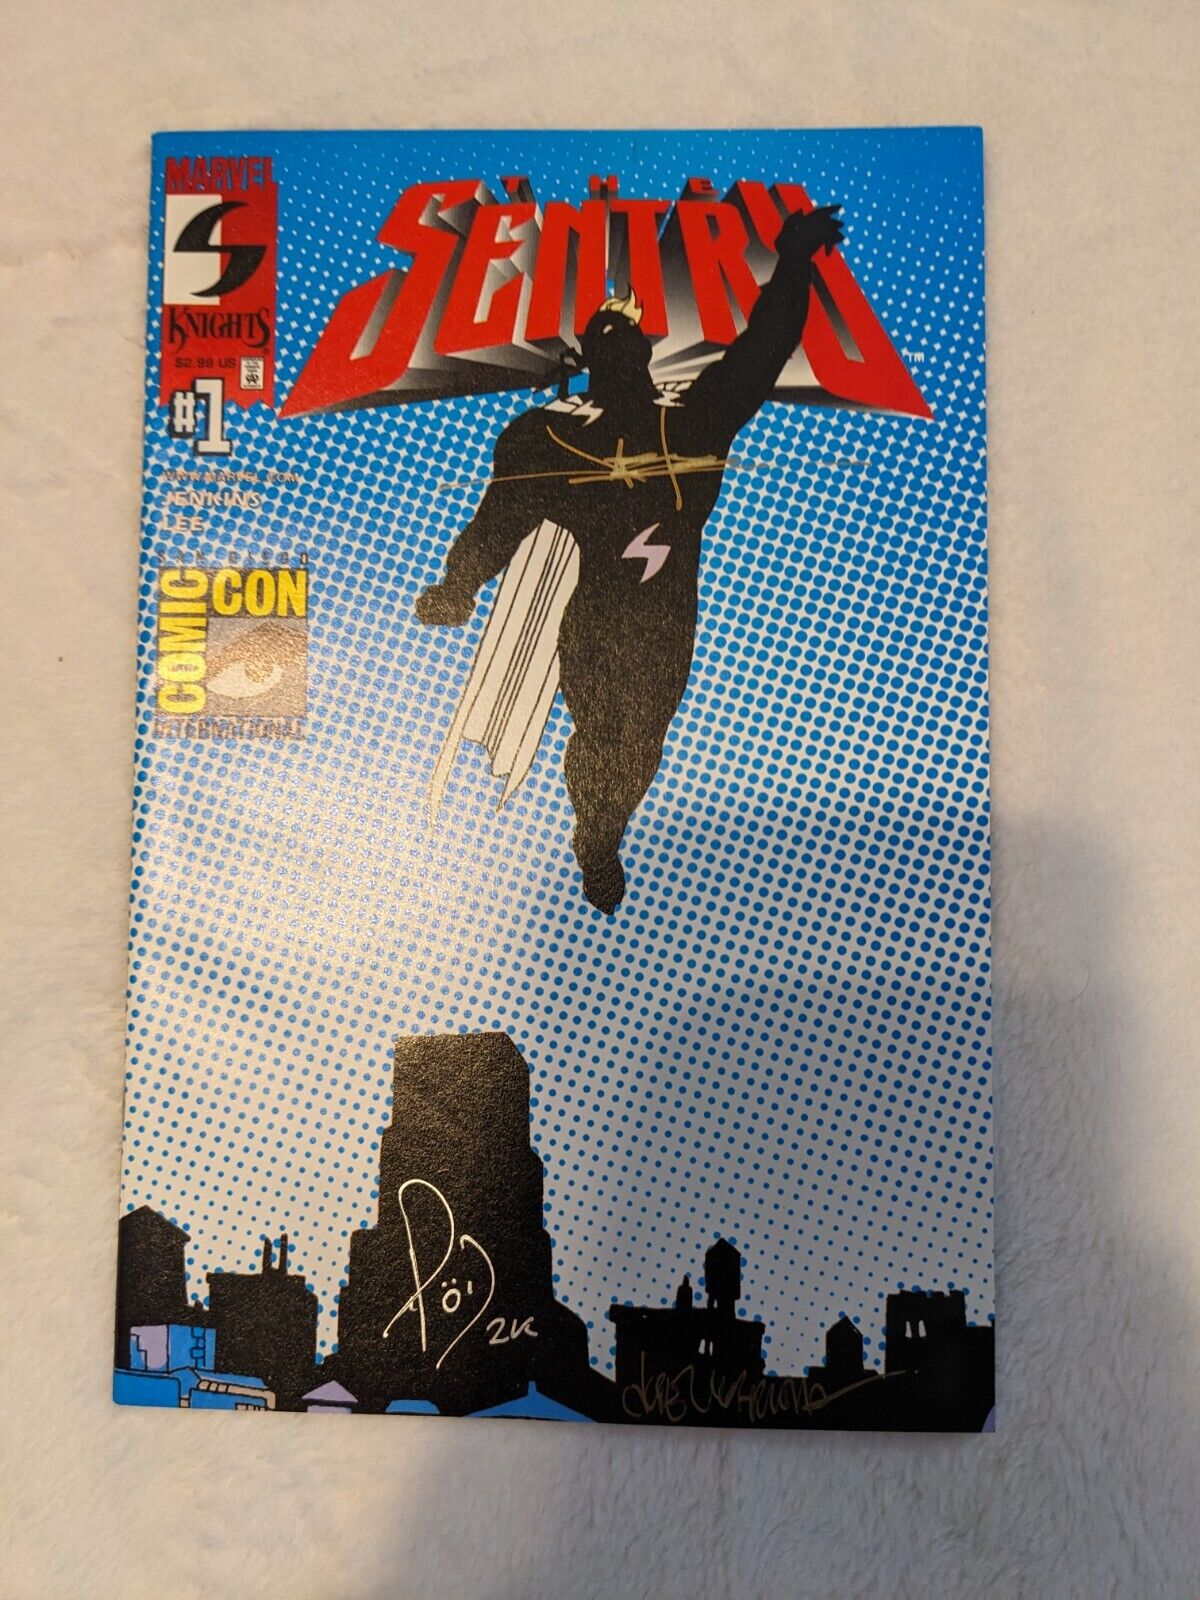 The Sentry #1 San Diego Comic Con Exclusive Autographed 3 times No COA